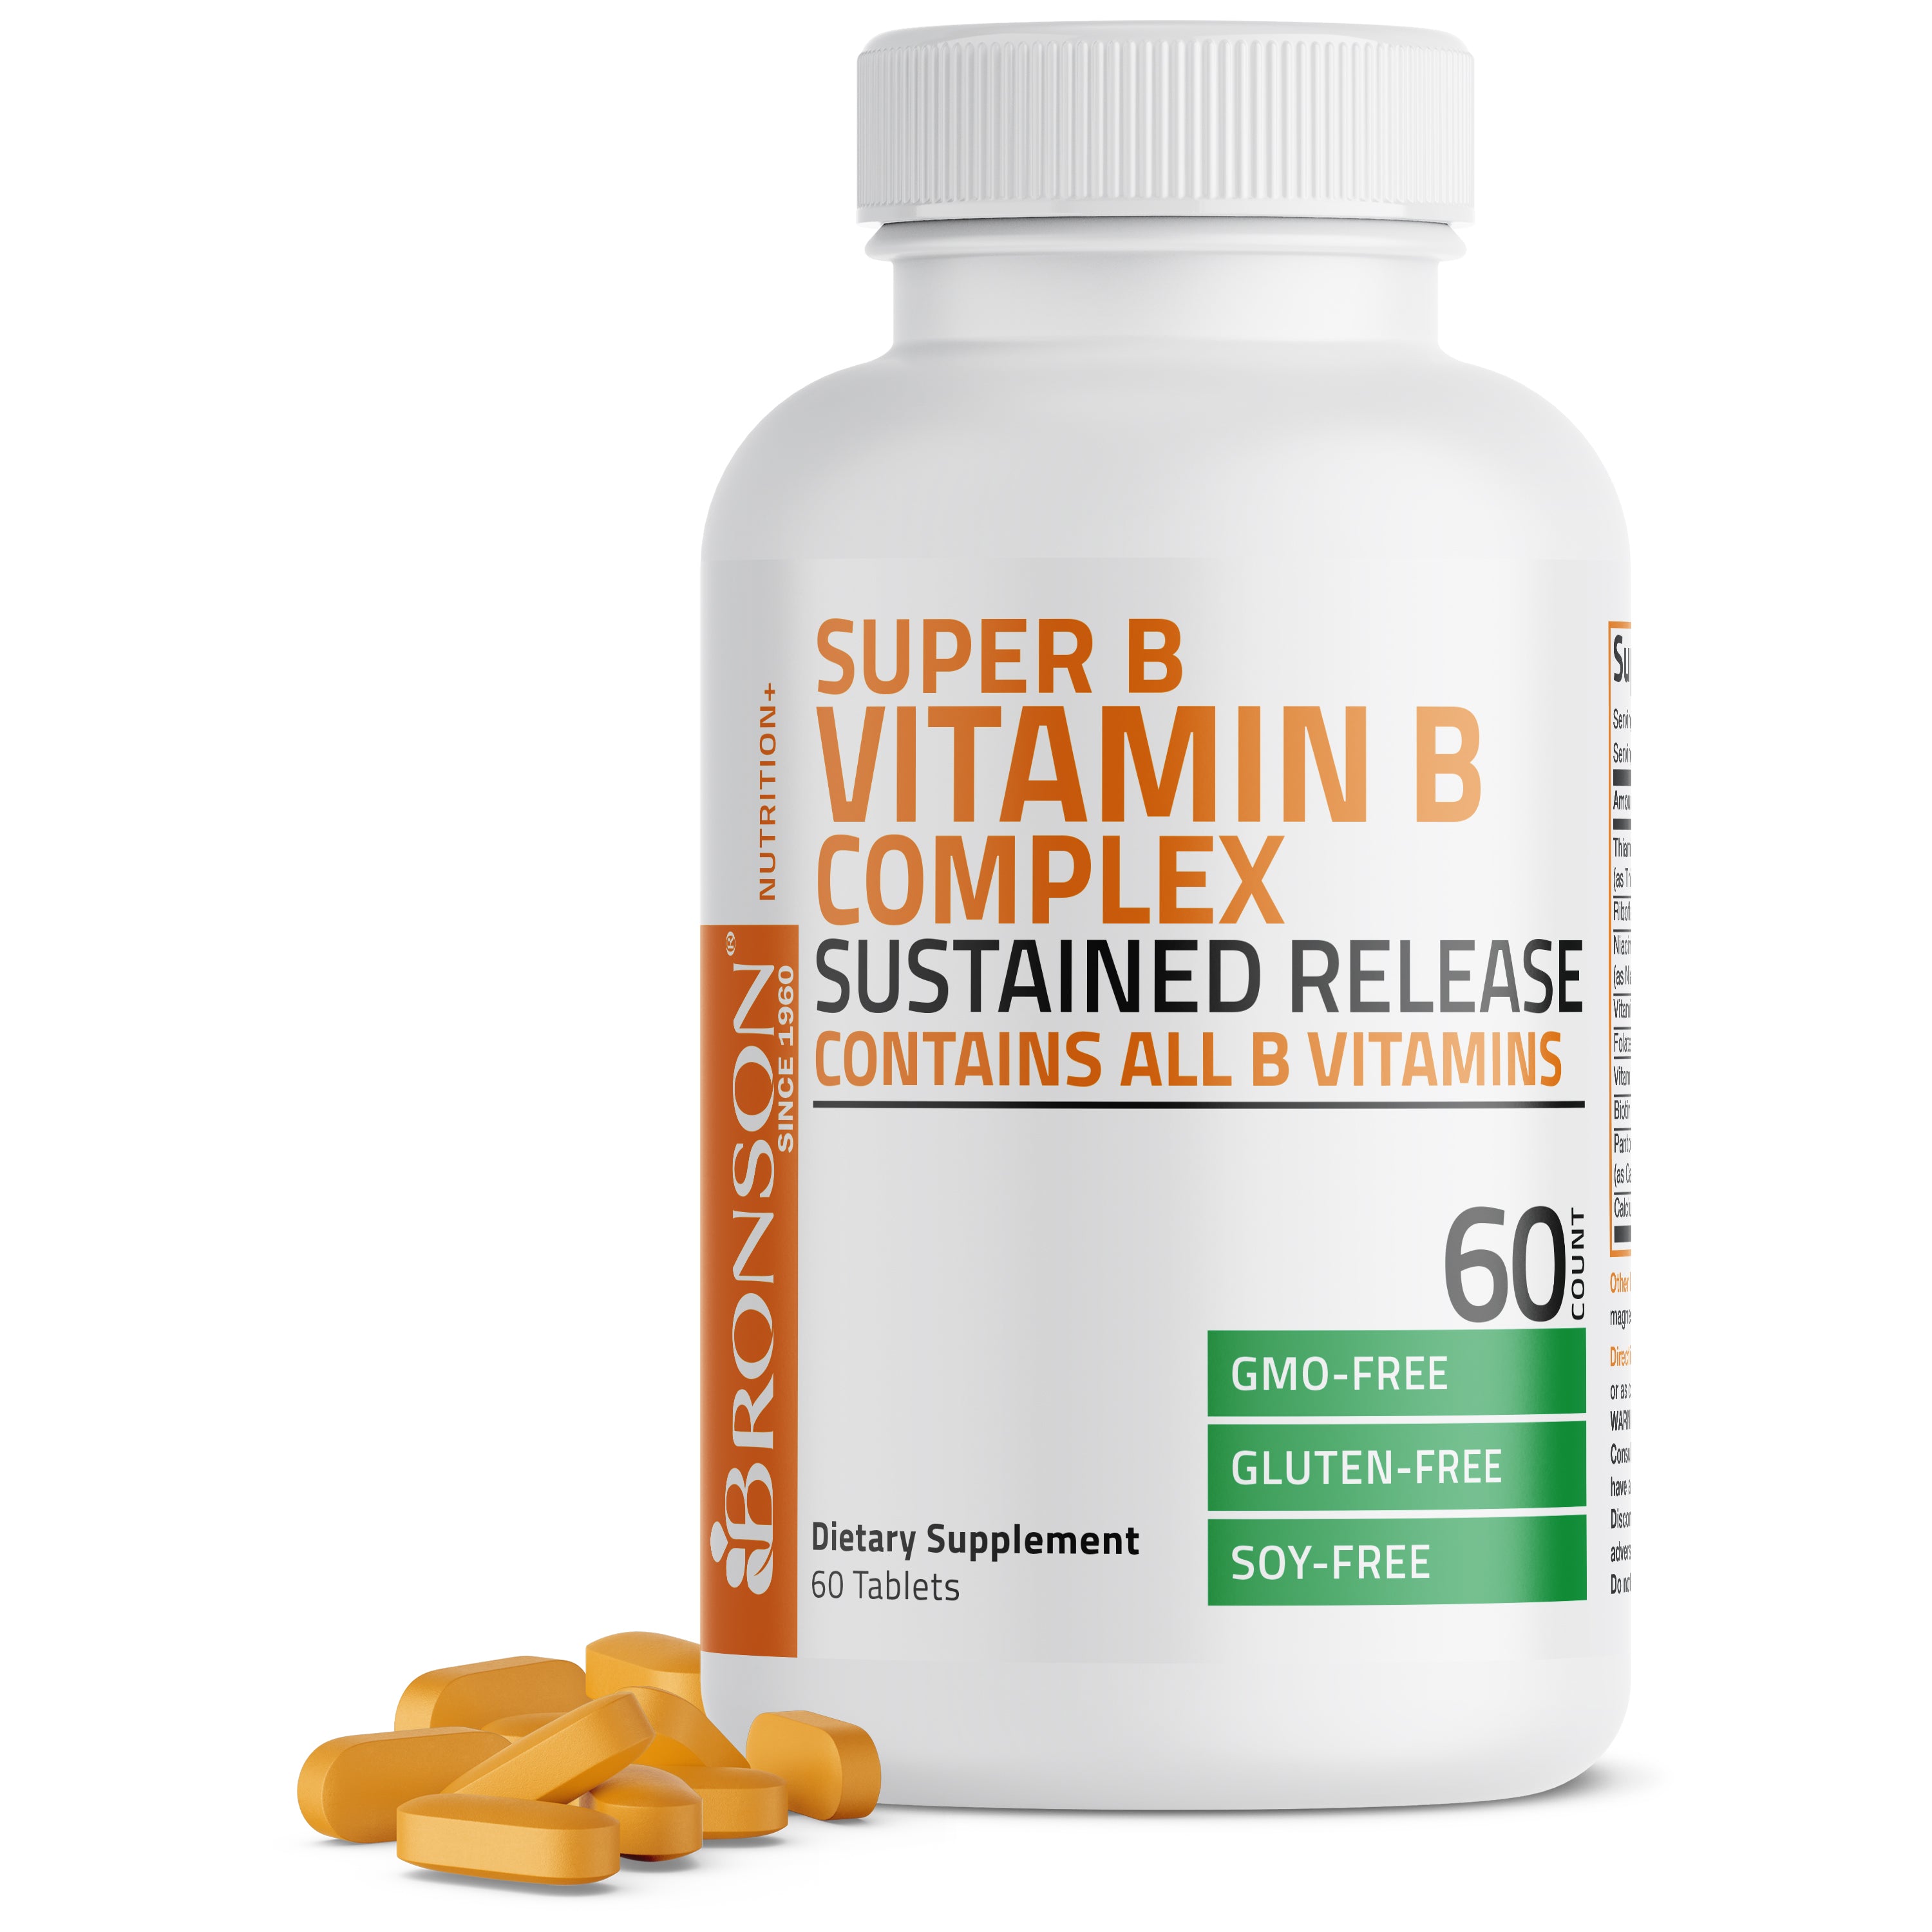 Vitamin B Complex Sustained Release view 14 of 5